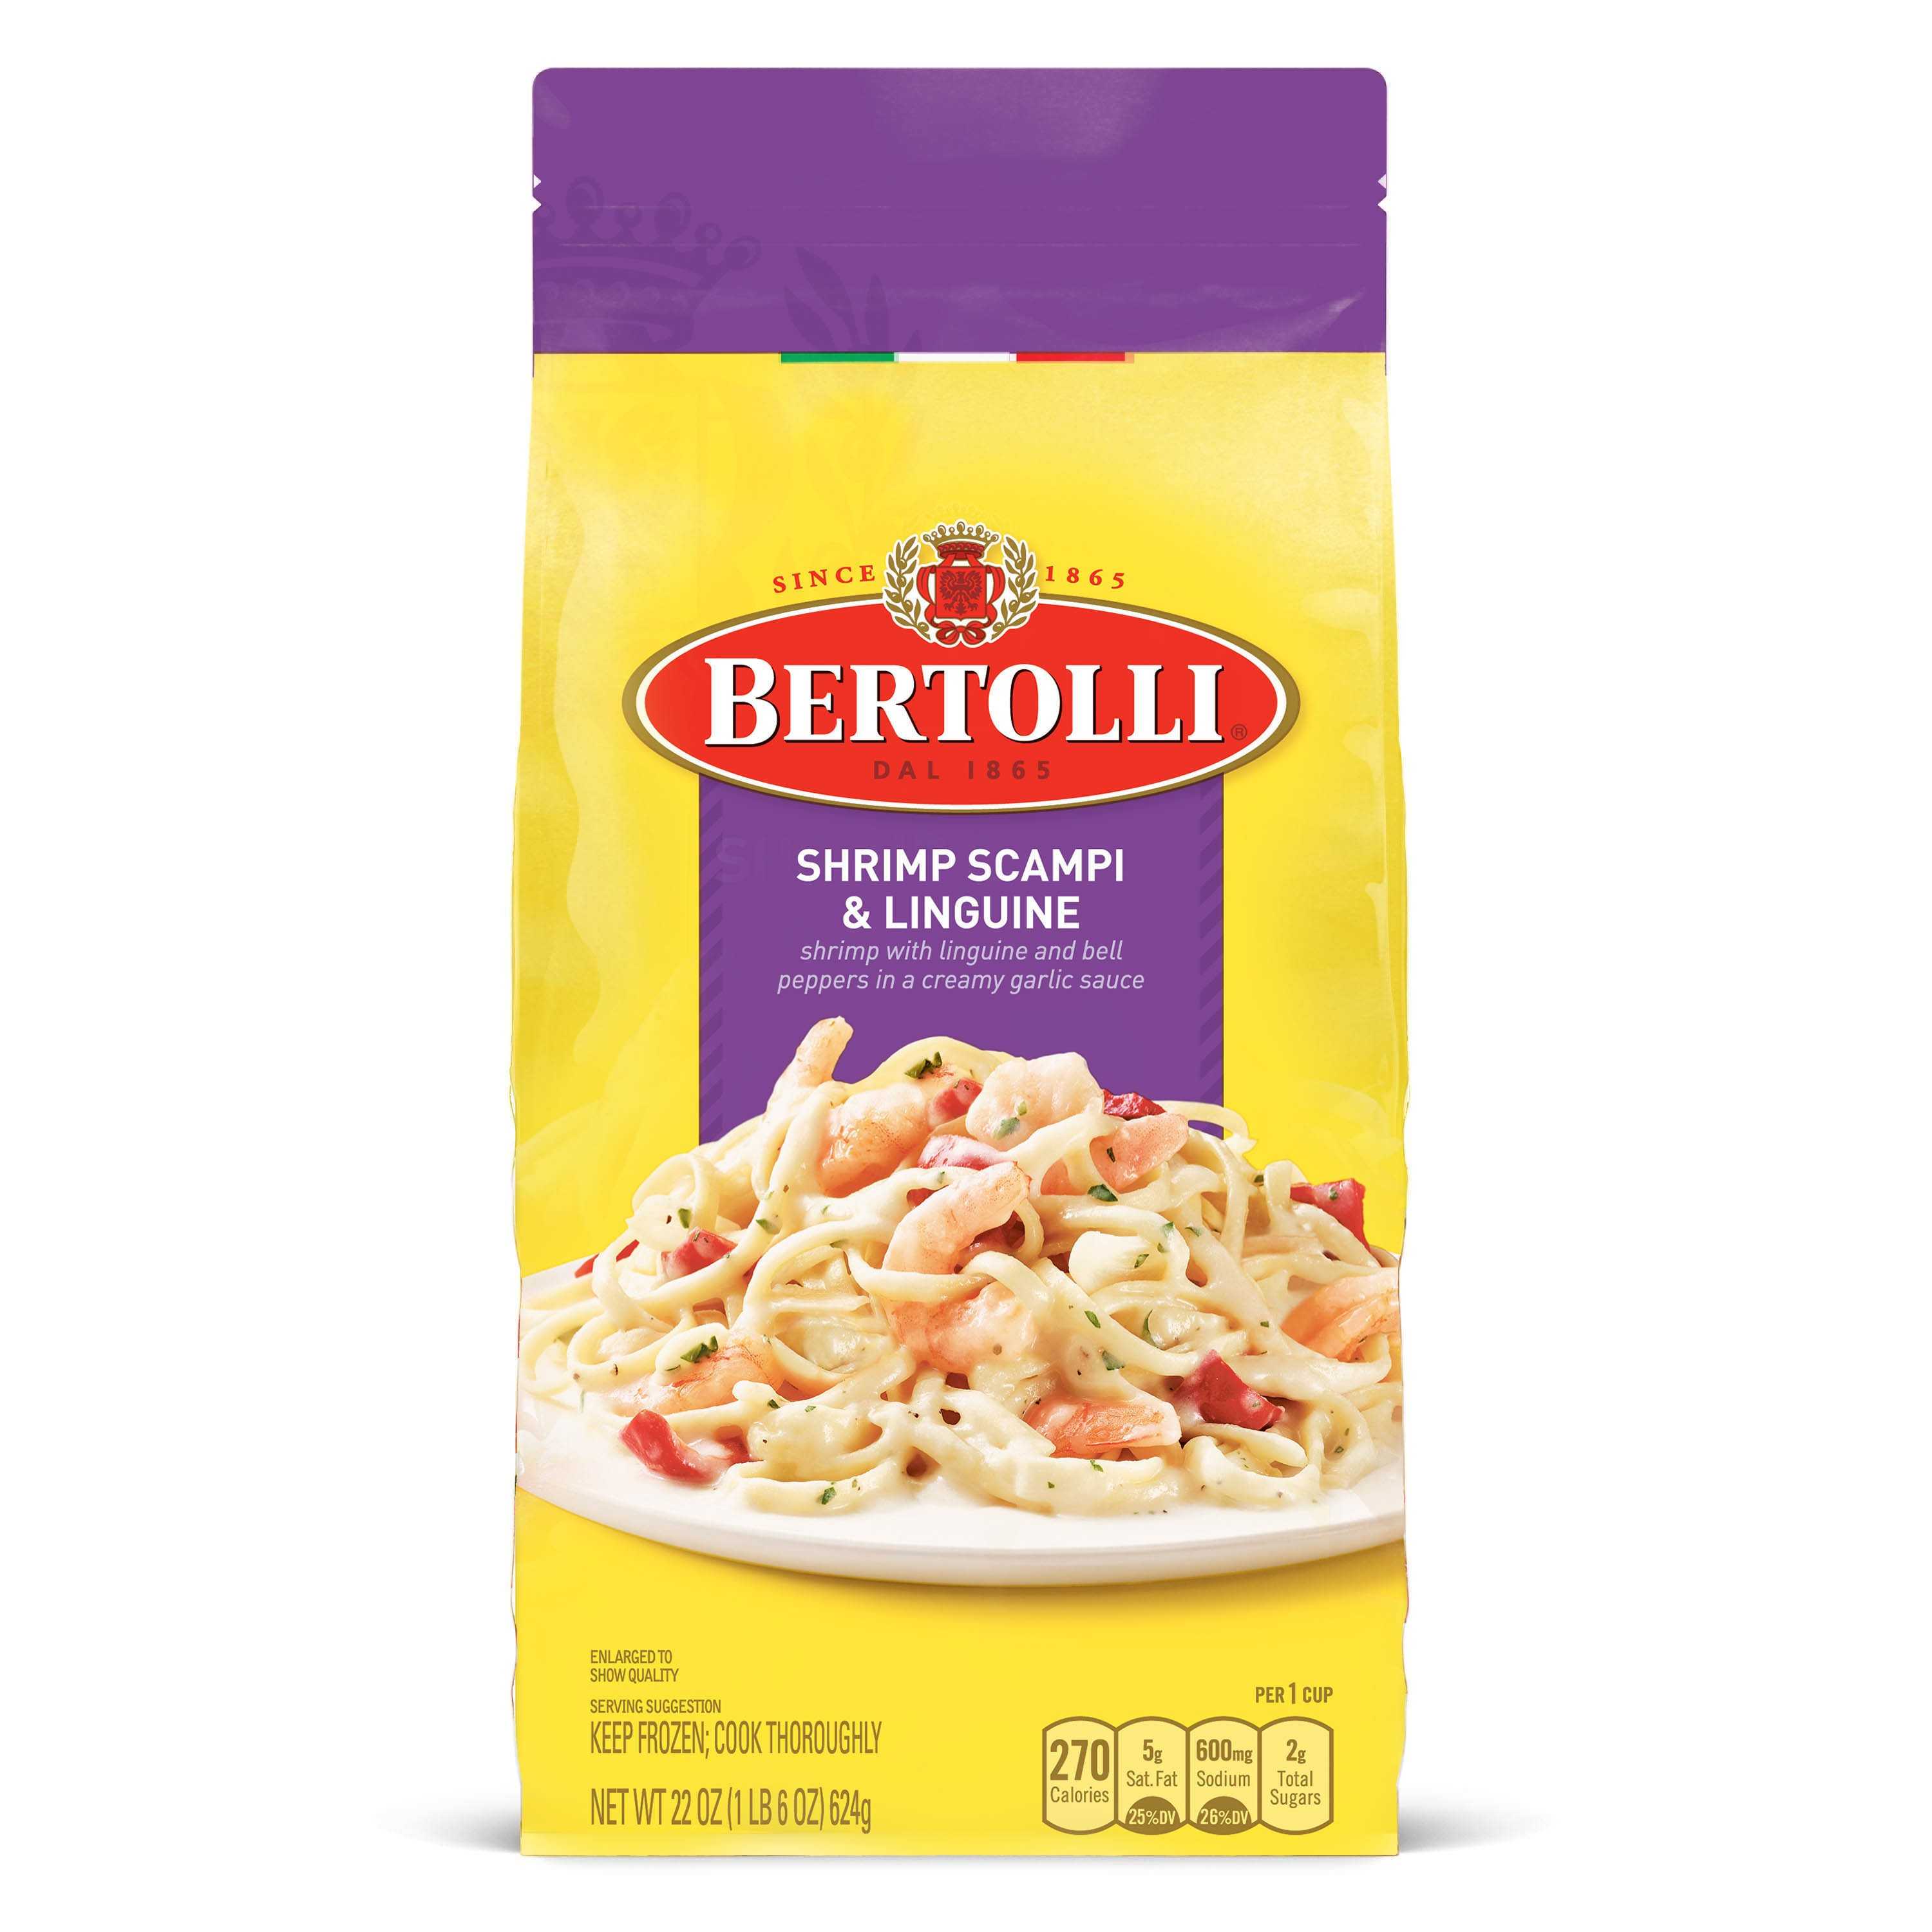 Bertolli Shrimp Scampi & Linguine Frozen Meals With Bell Peppers in a Creamy Garlic Sauce, 22 oz.